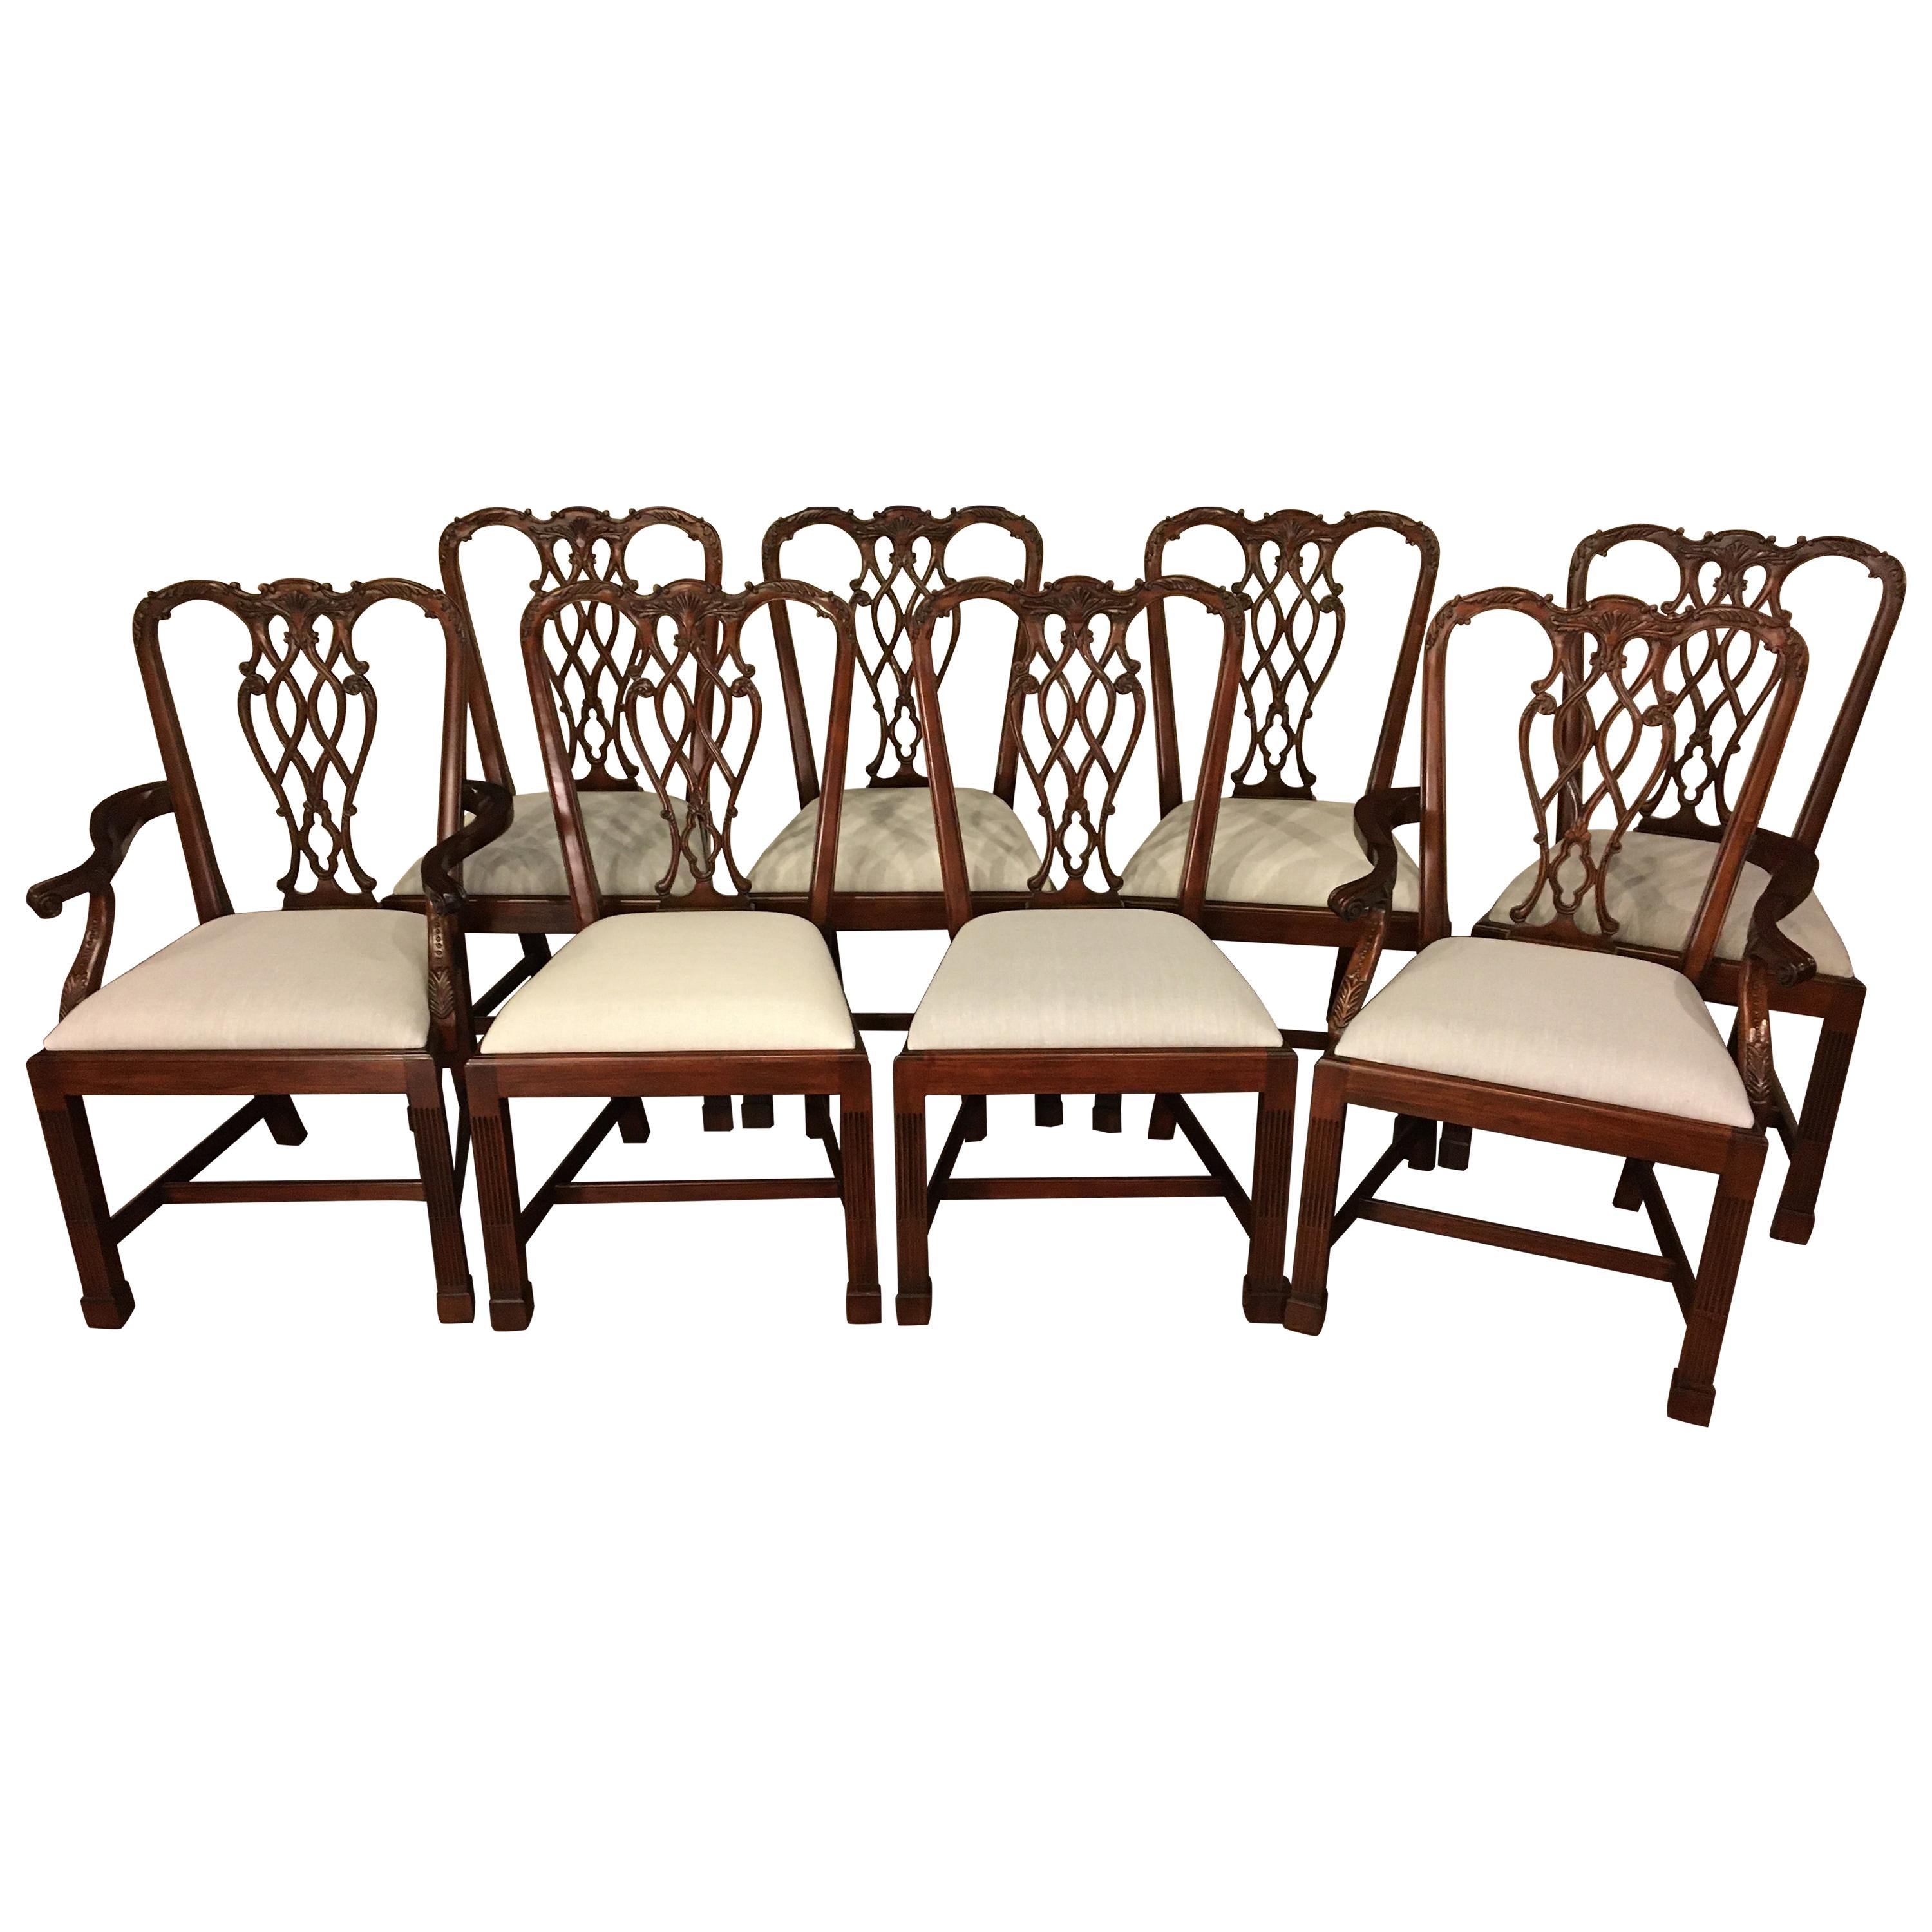 Eight New Straight Leg Chippendale Style Dining Chairs by Leighton Hall For Sale